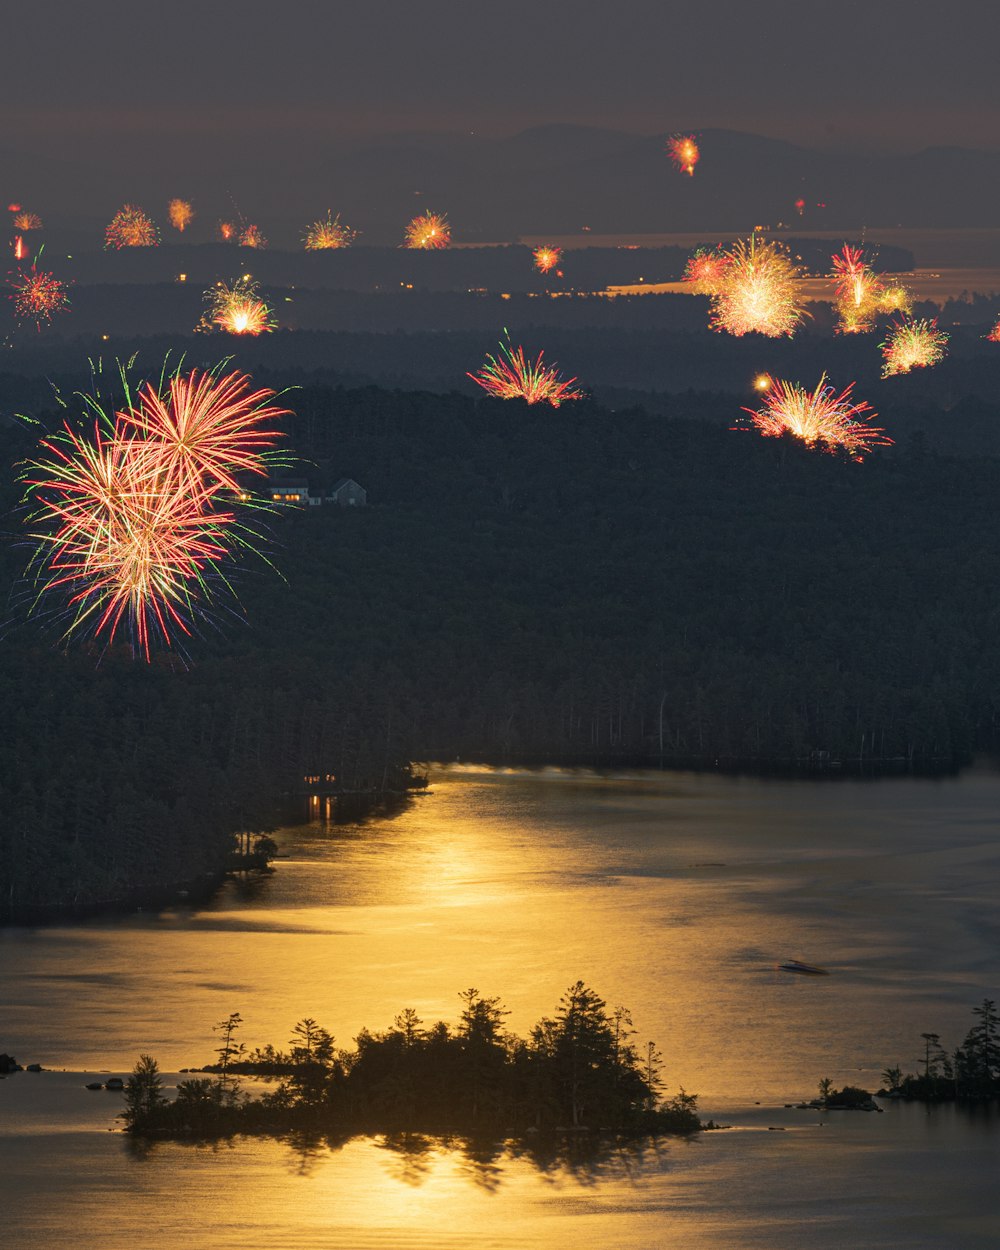 fireworks display over lake during night time